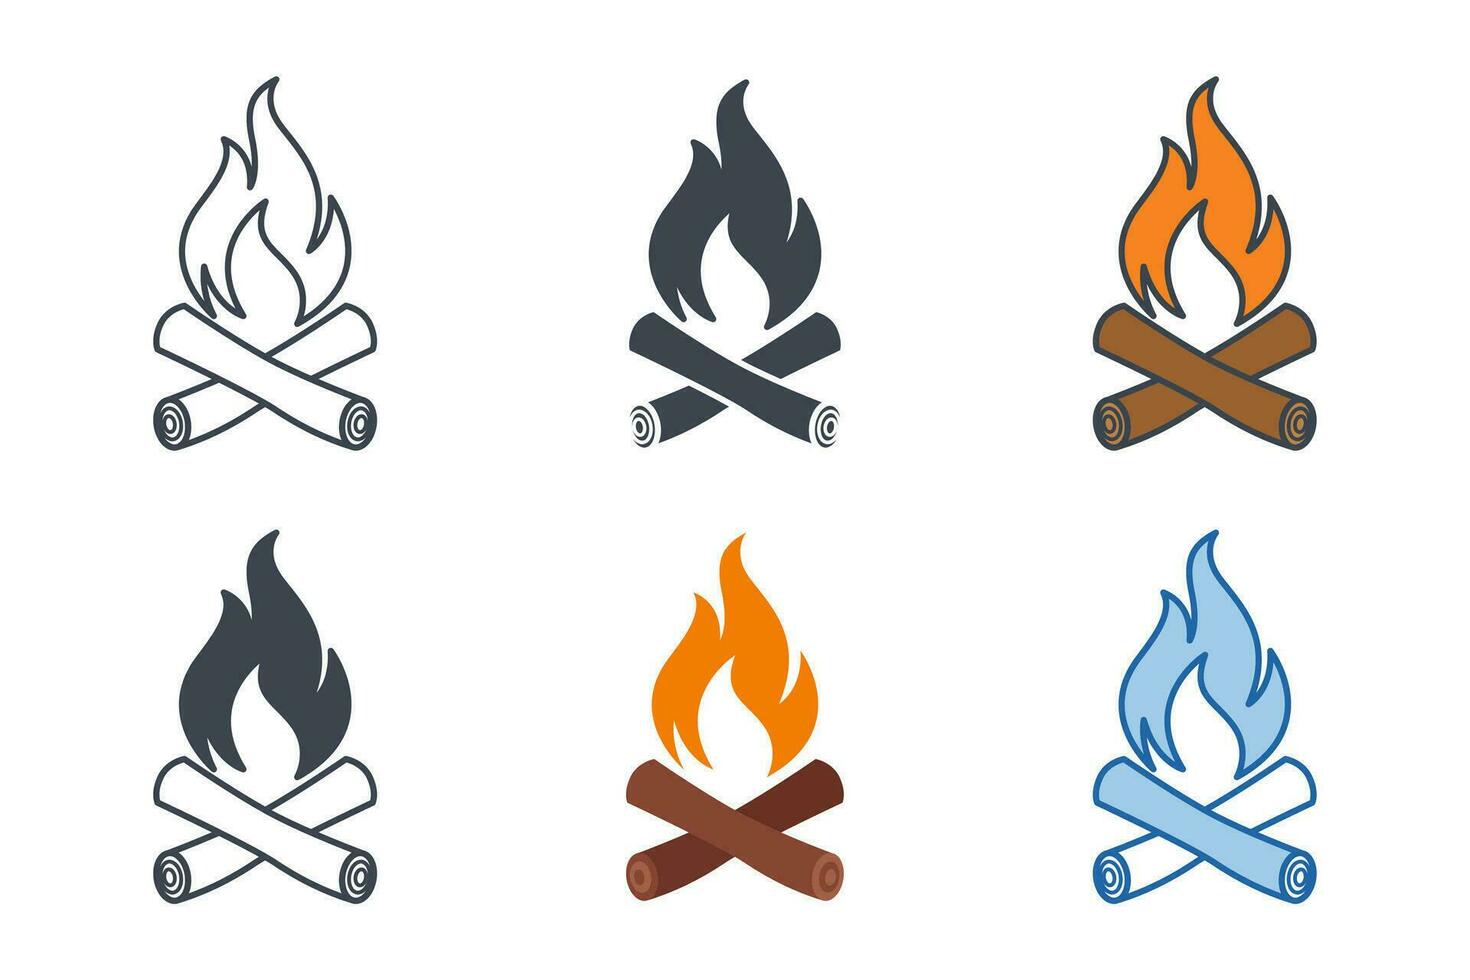 Campfire icon collection with different styles. Campfire icon symbol vector illustration isolated on white background